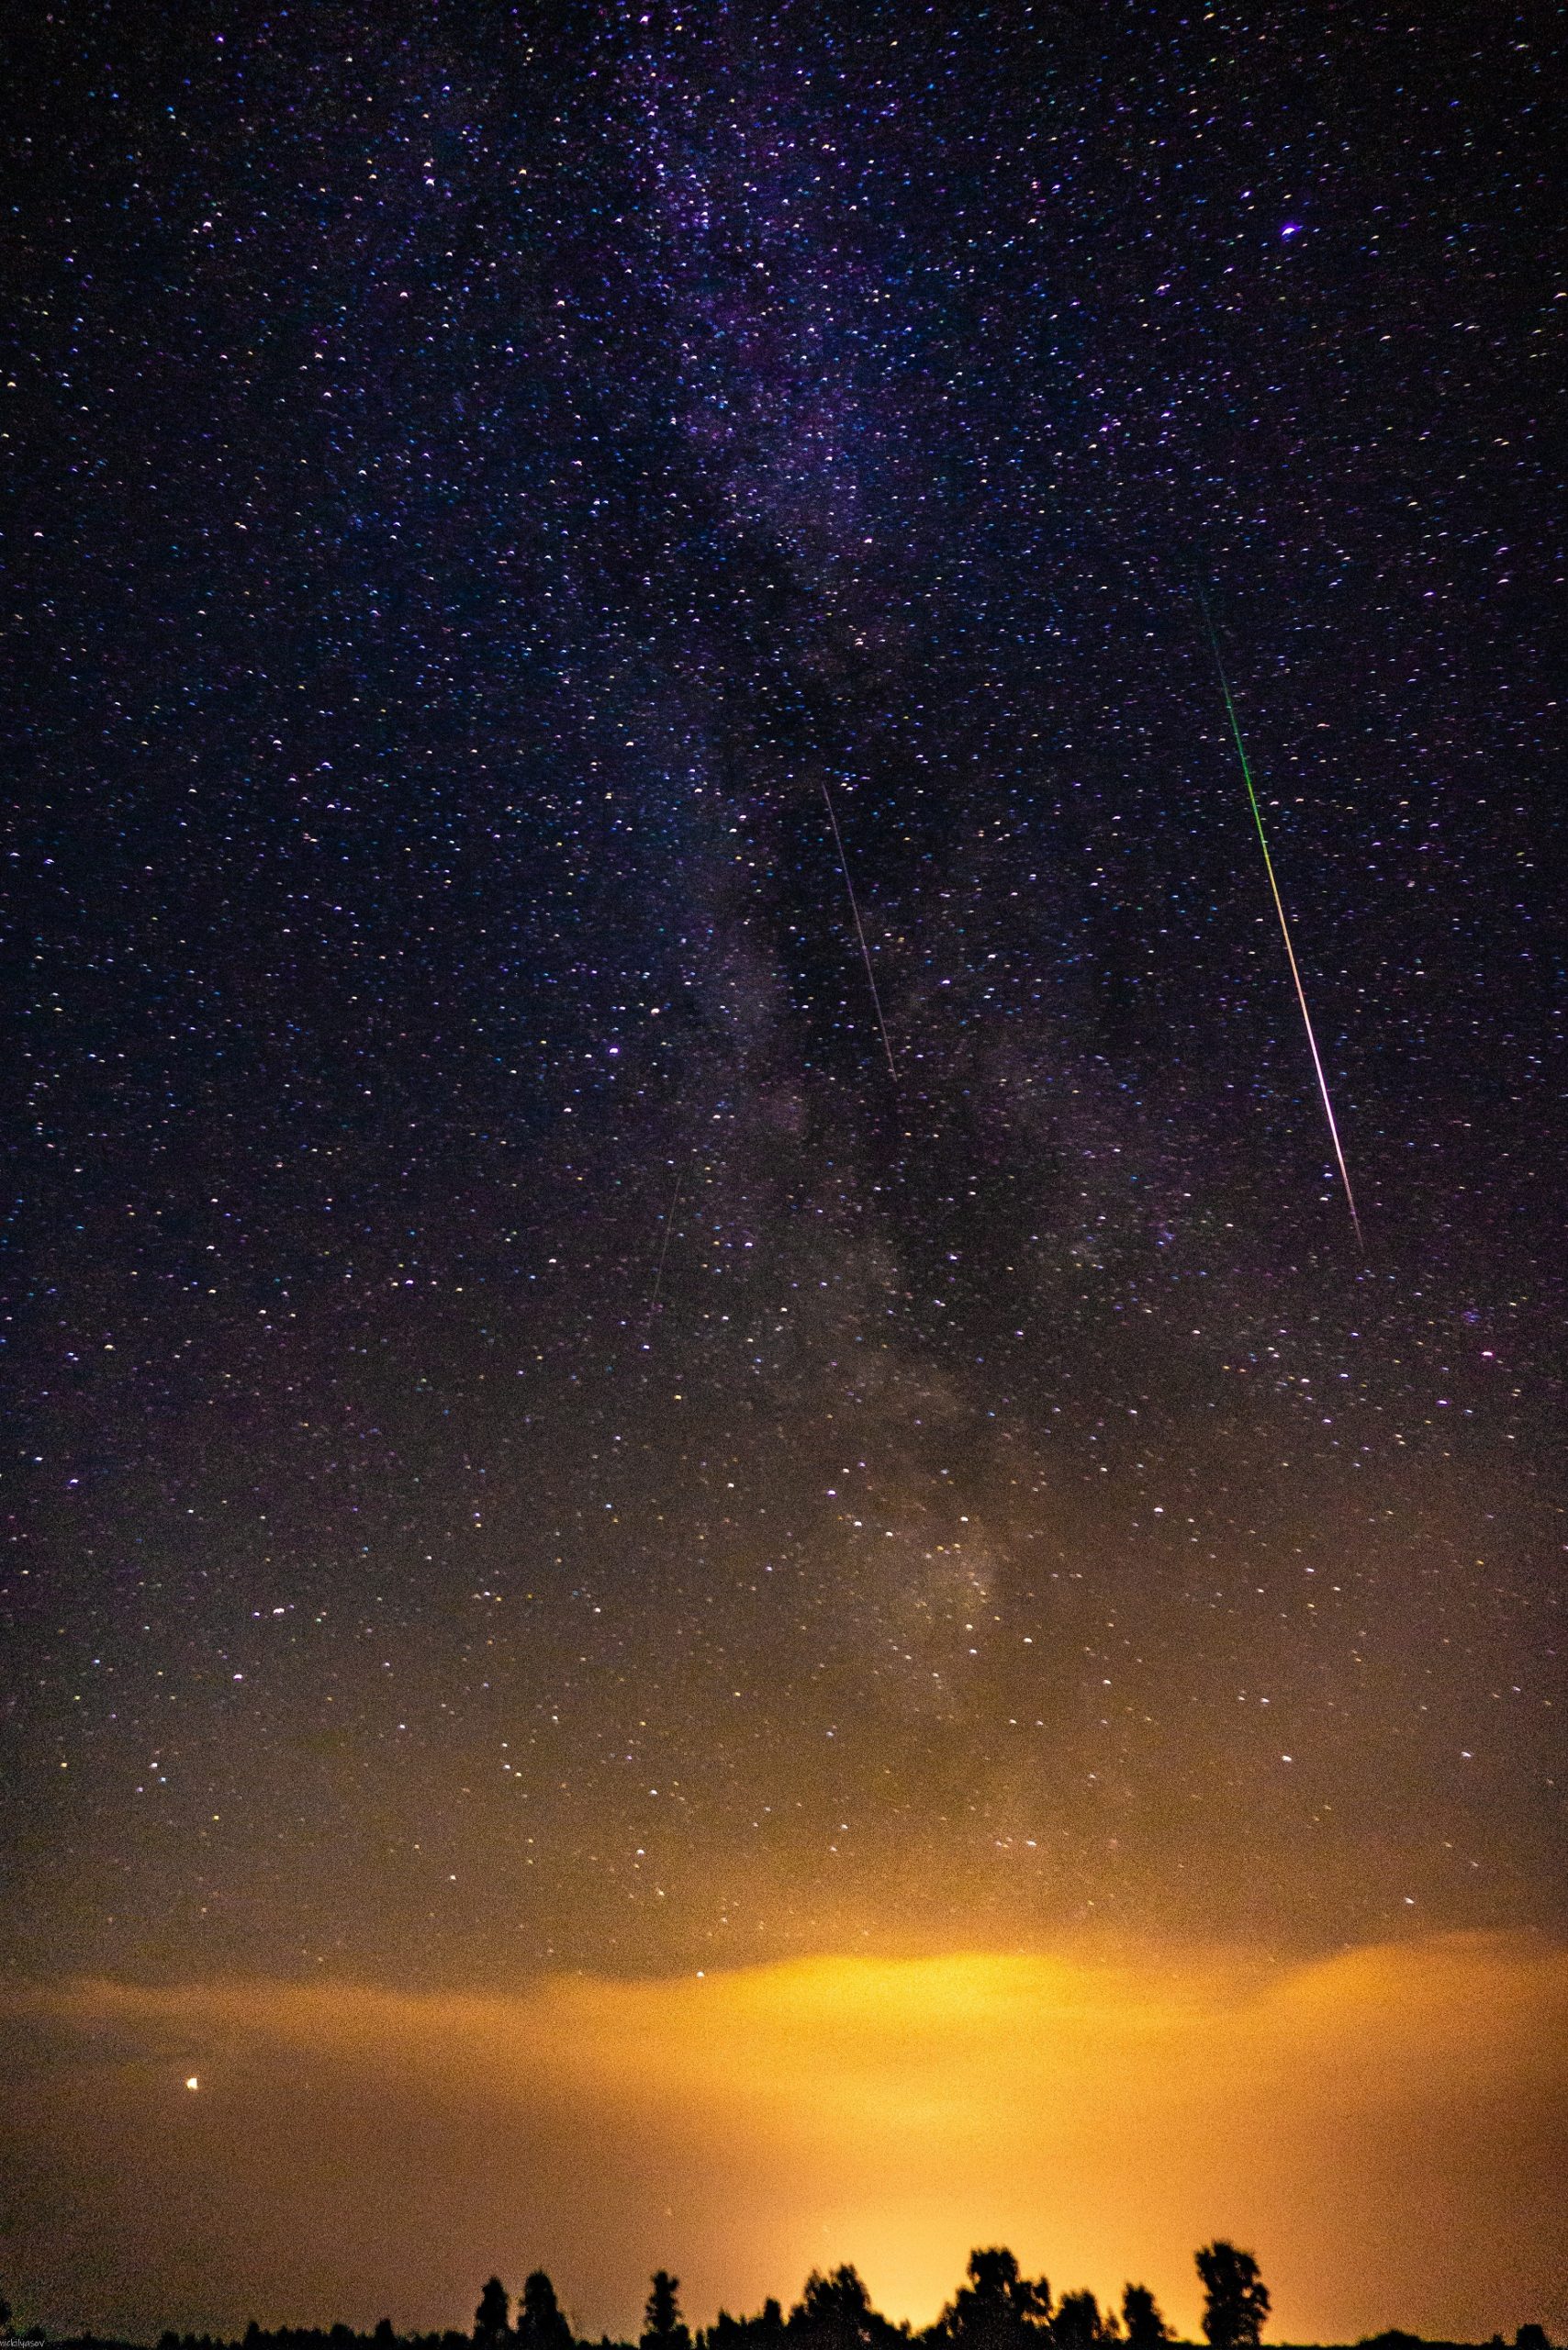 A photograph of several meteors shooting past in the night sky as the last bits of sunset fade away near the horizon.